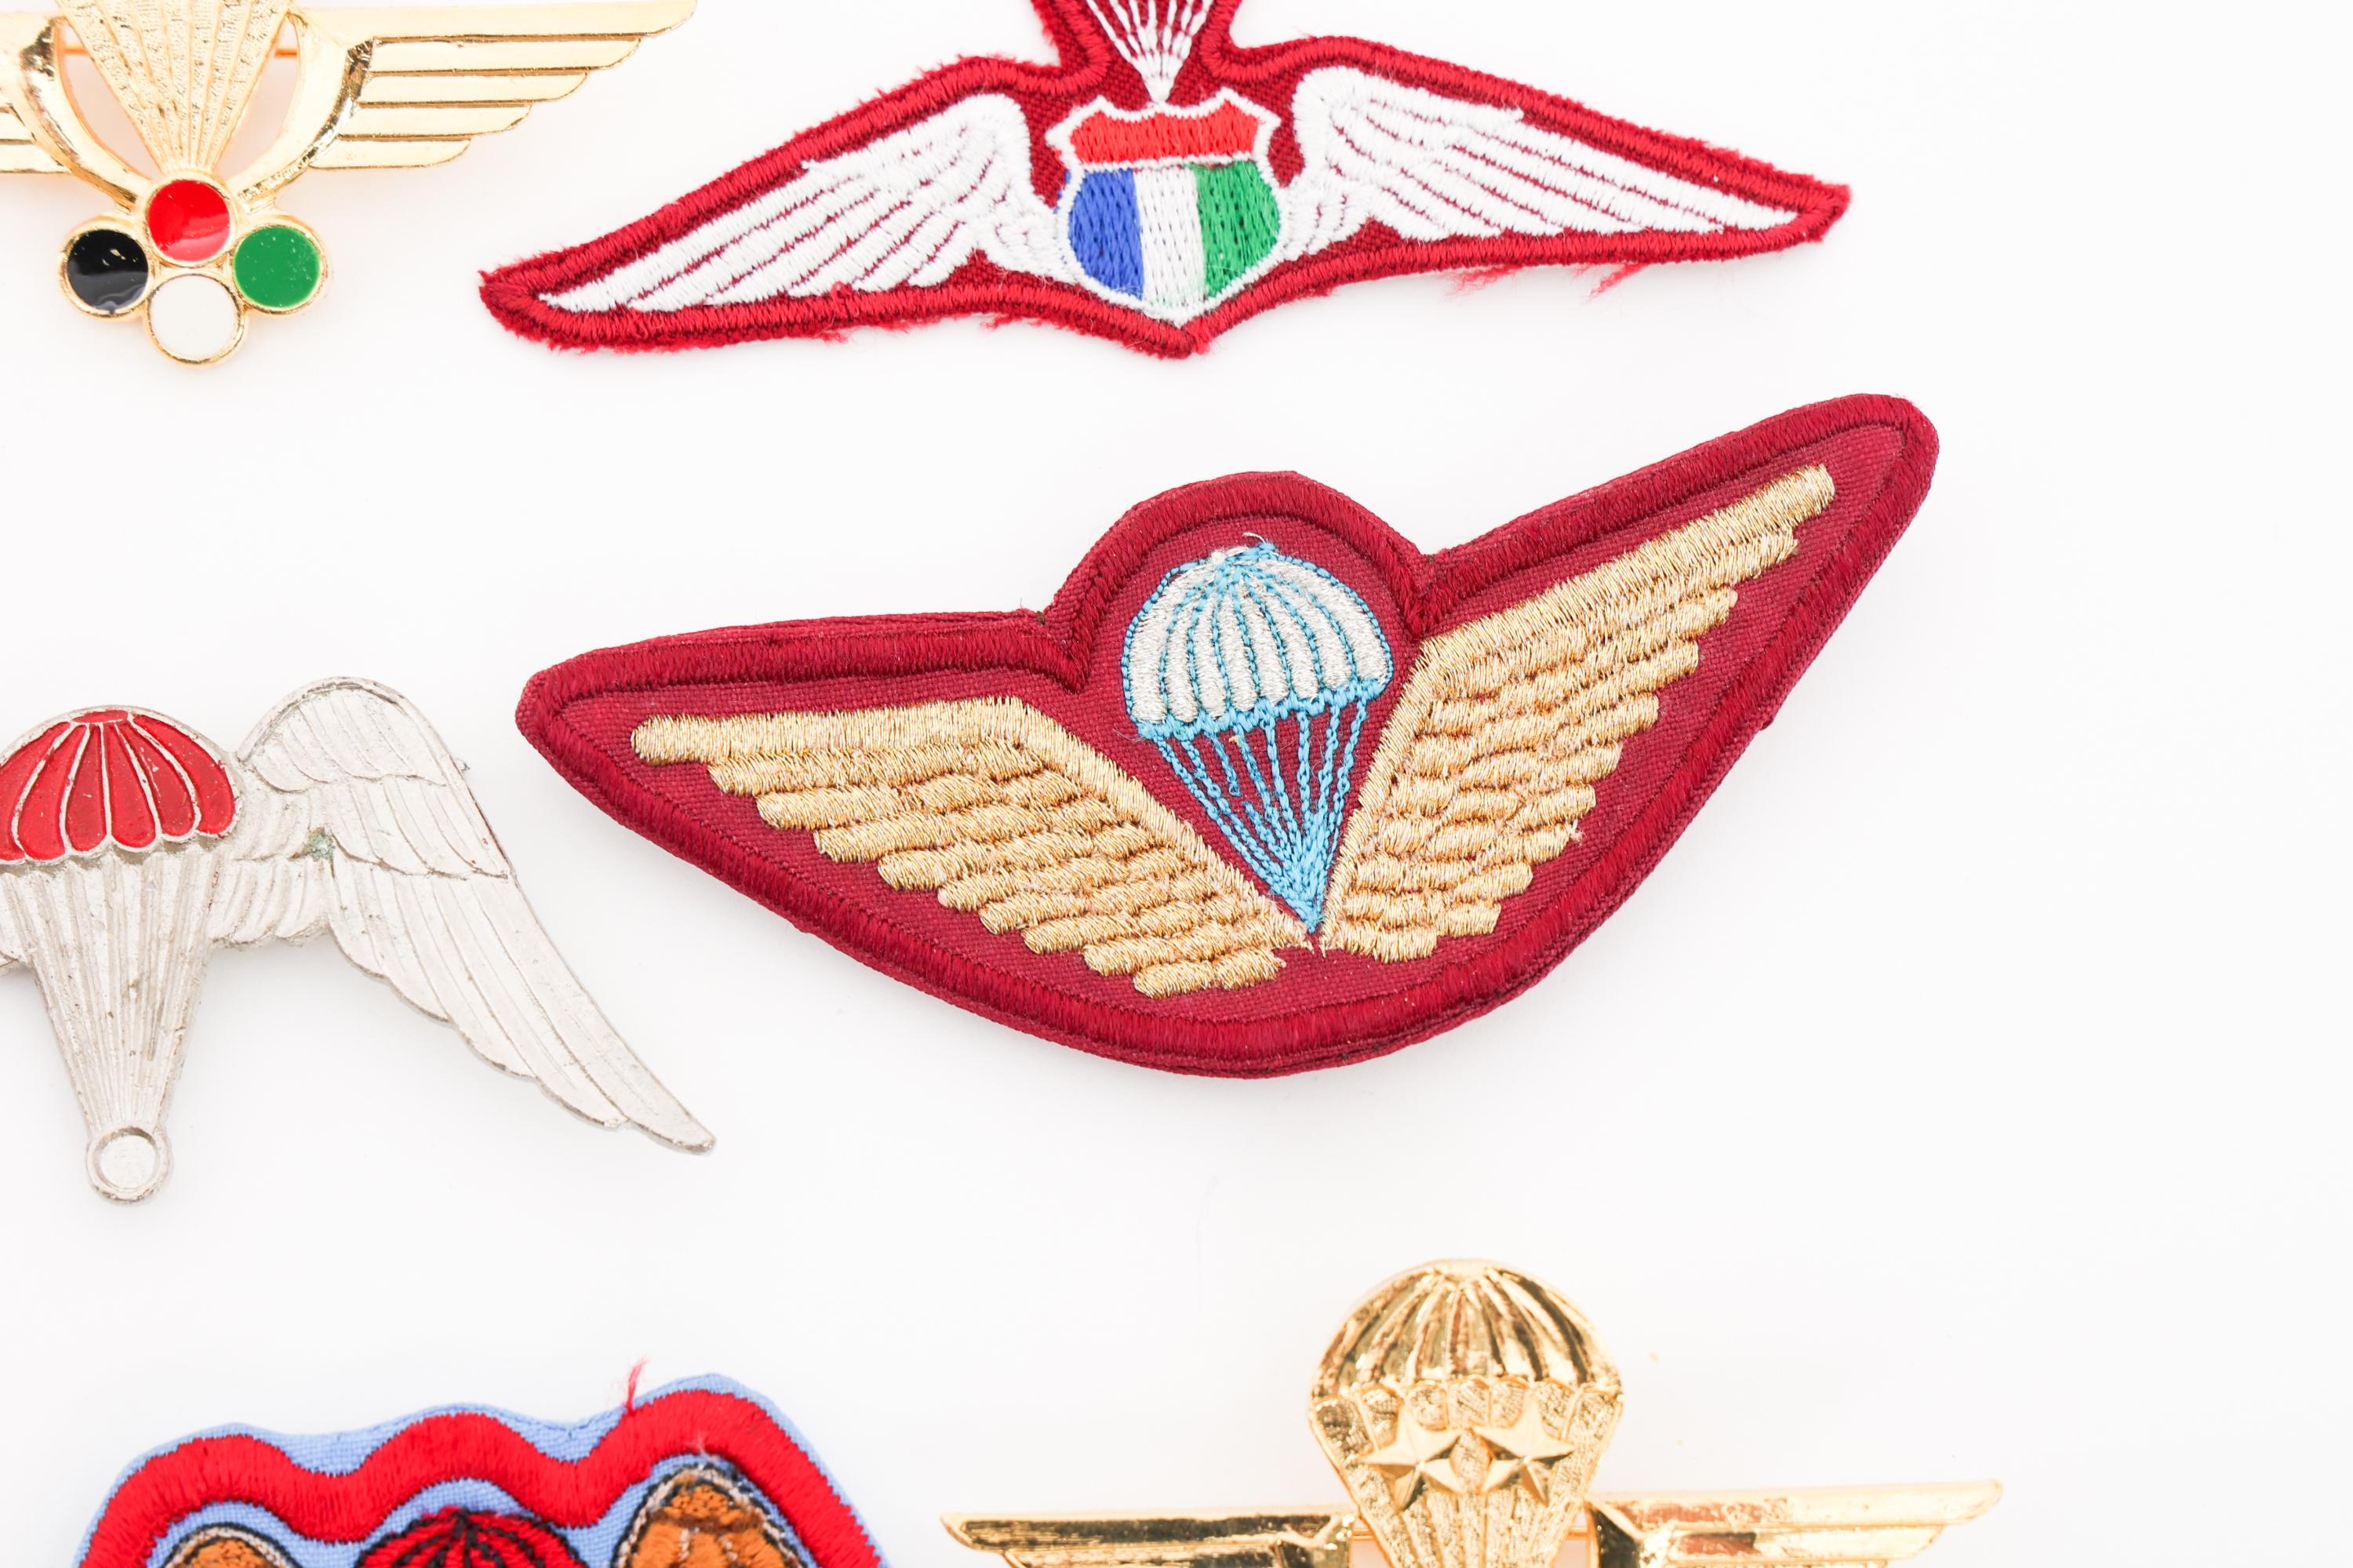 COLD WAR - CURRENT UAE PARATROOPER JUMP WINGS